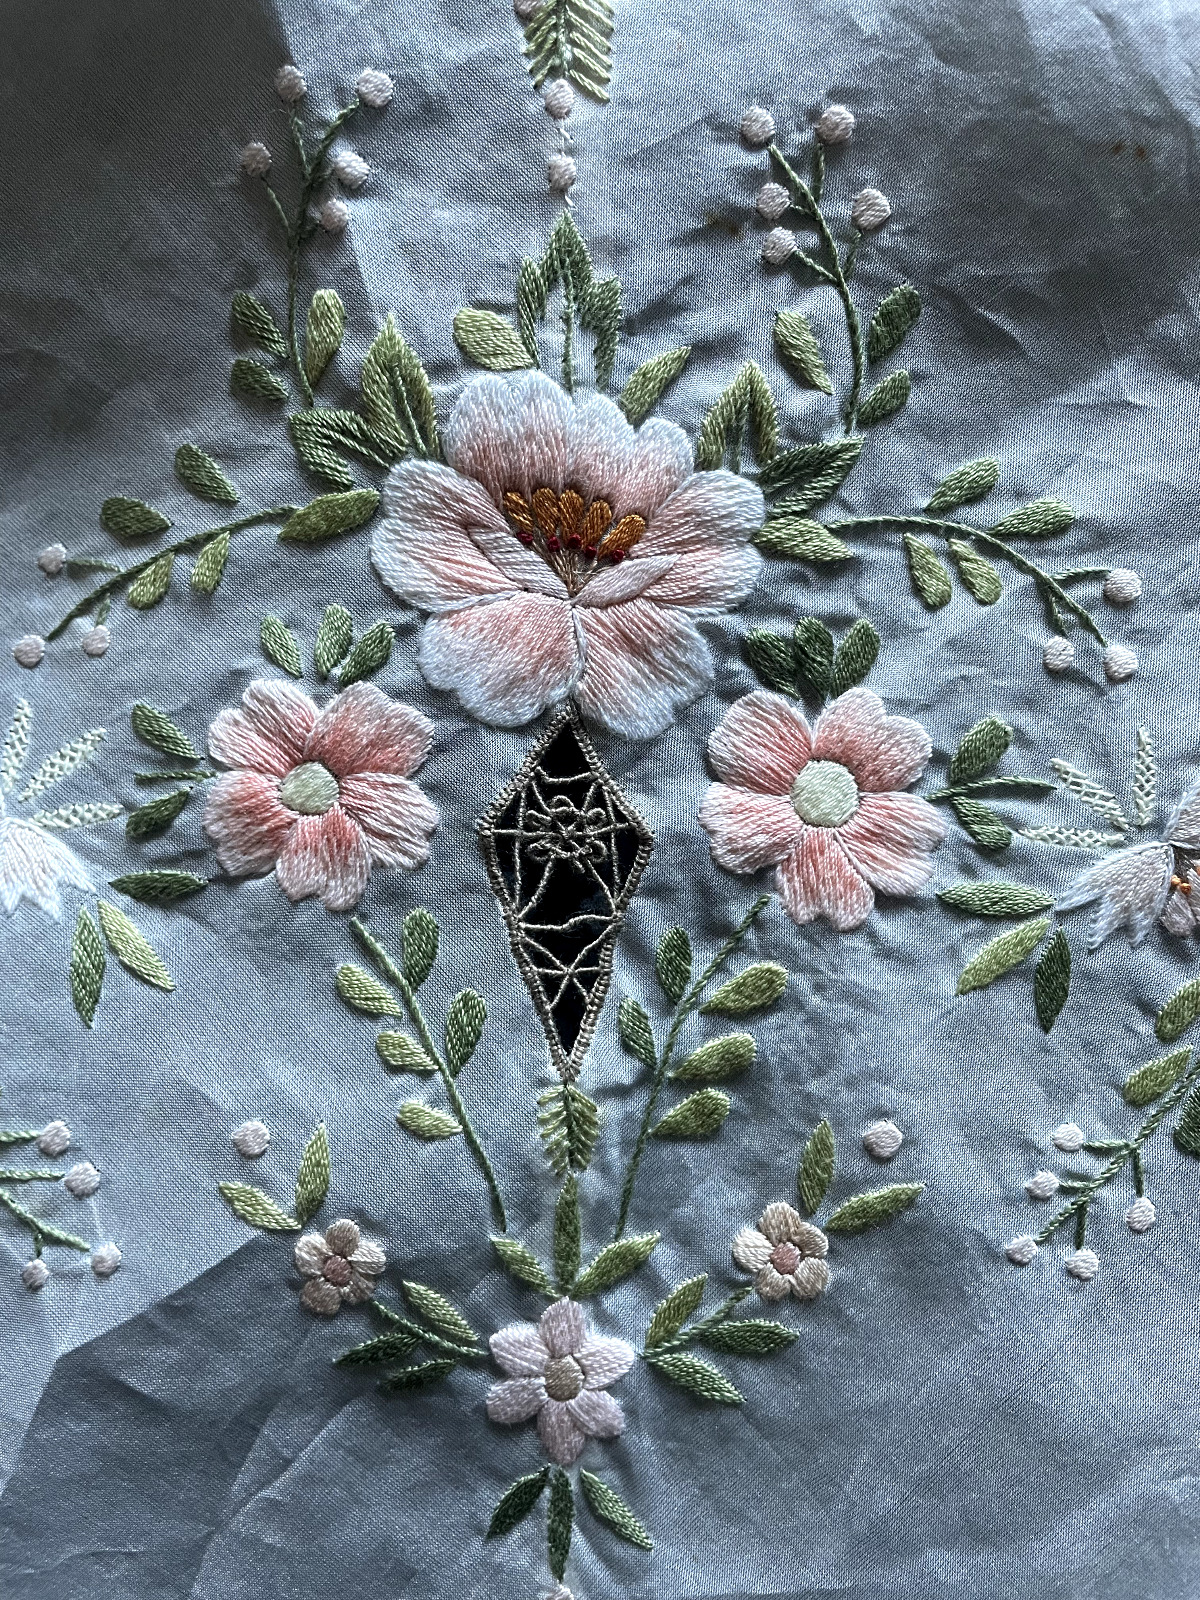 Vintage Organdy Embroidered Floral Sheer Tablecloth -STUNNING DETAIL One of Kind